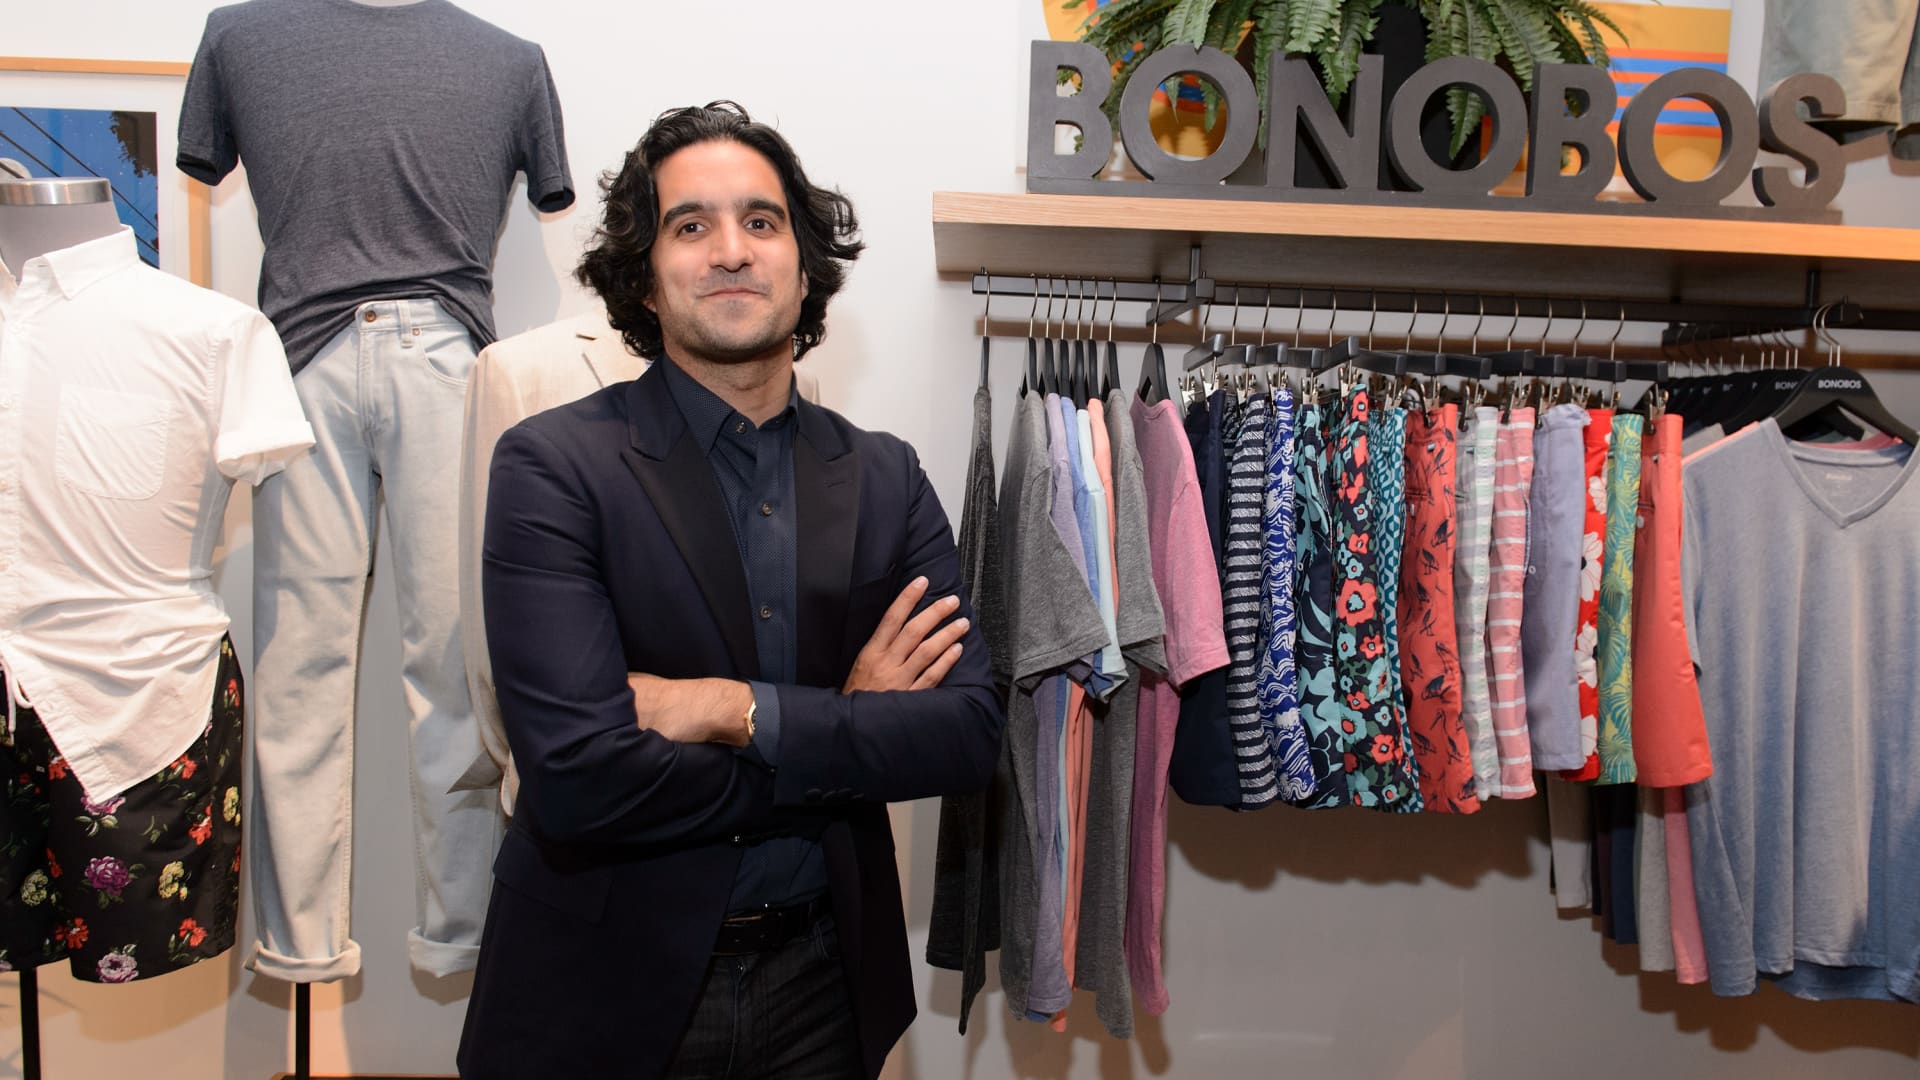 Bonobos founder who helped transform Walmart opens up about mental health struggles